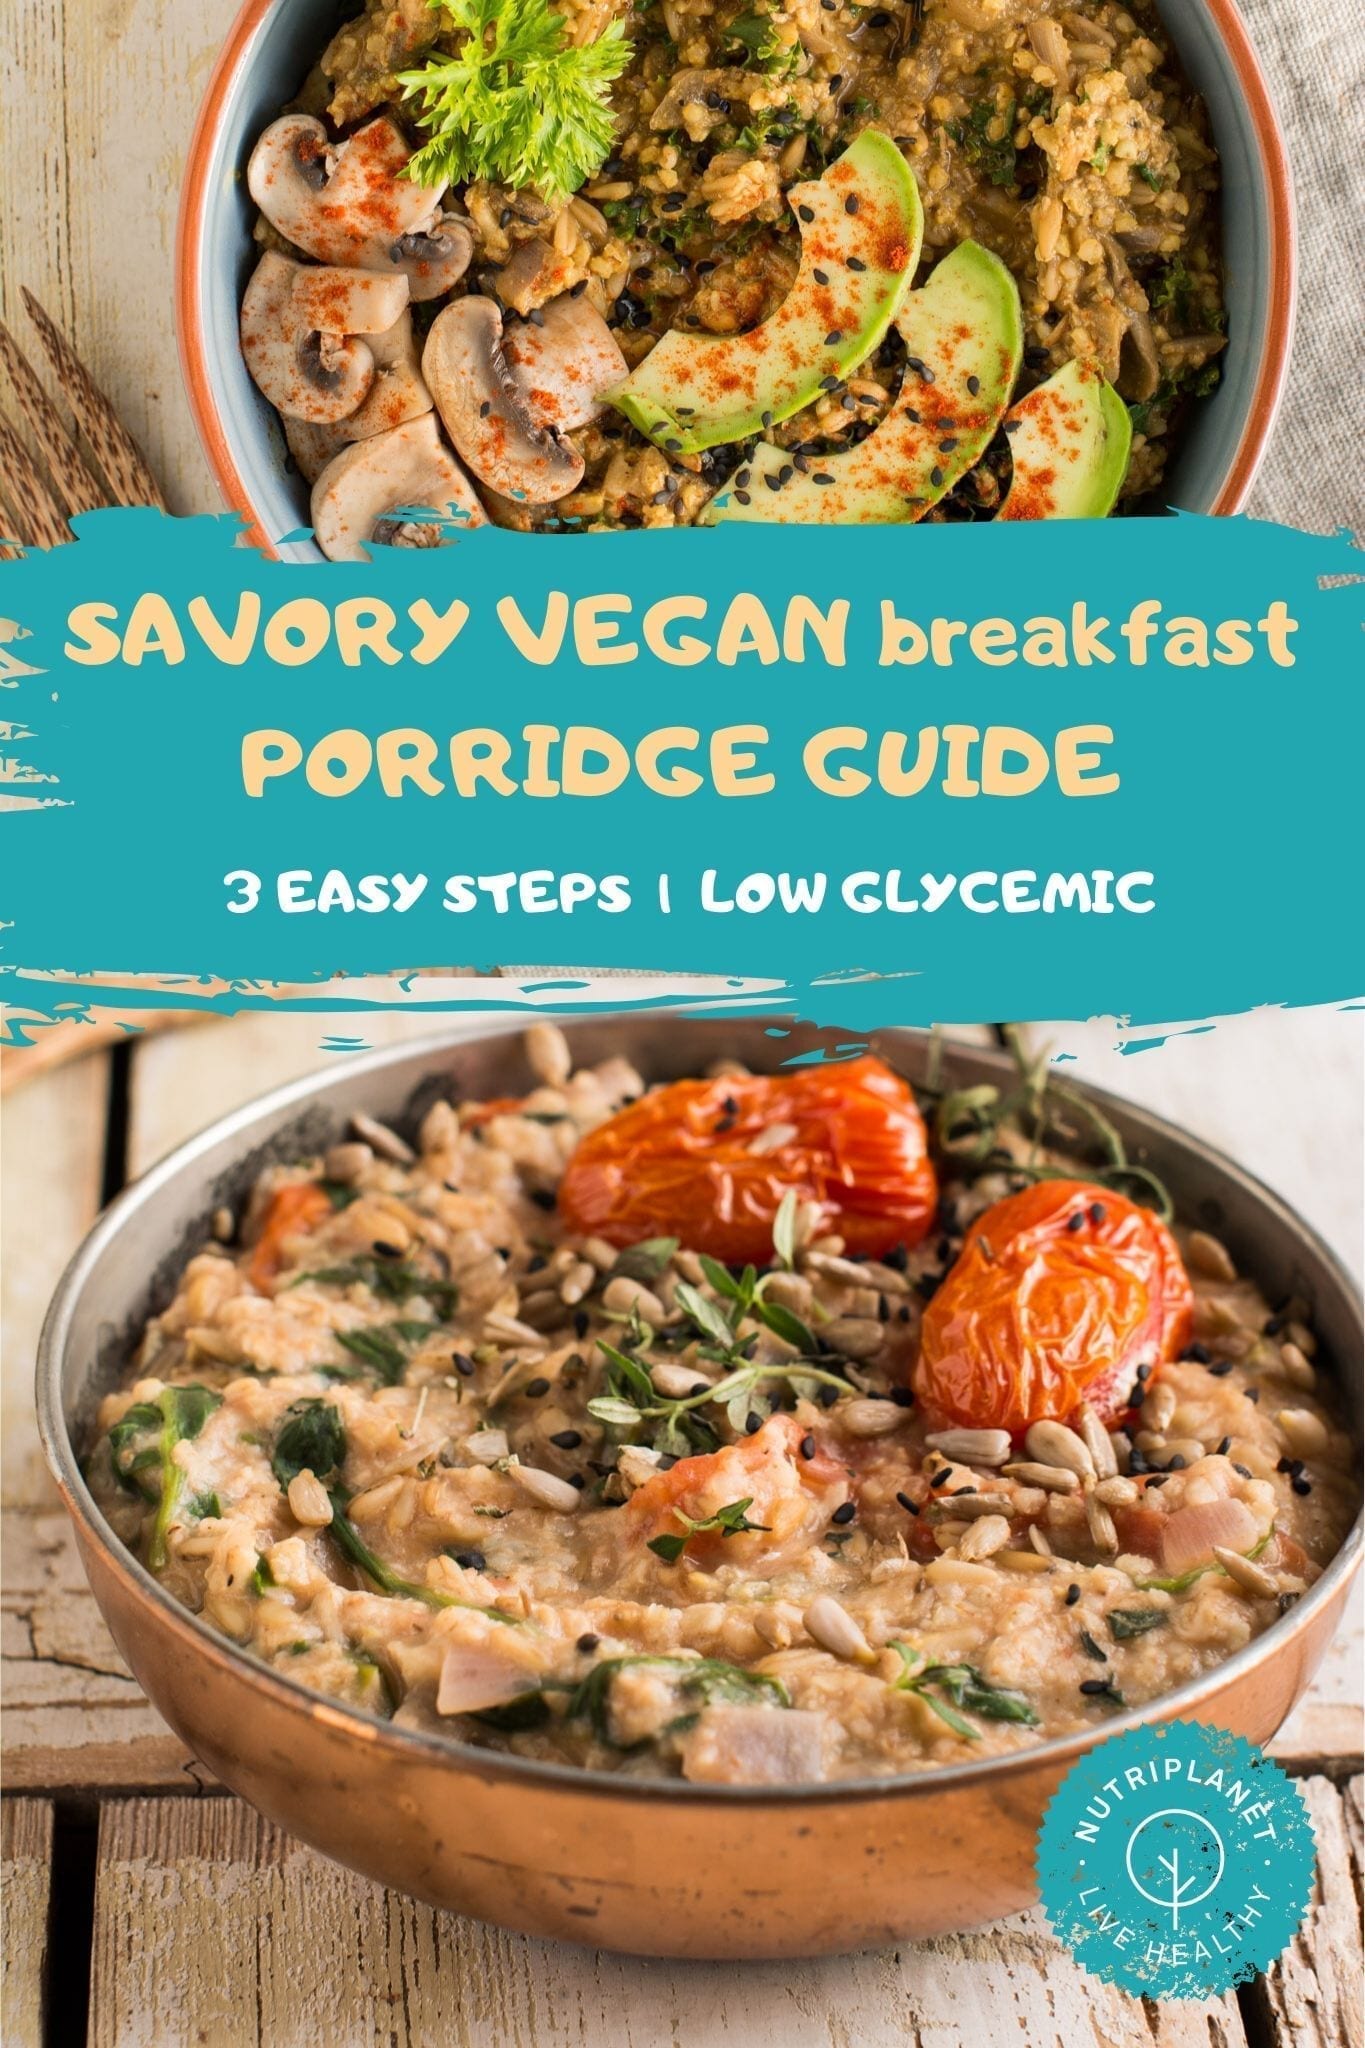 Learn how to make delicious savory vegan breakfast porridges using different grains and flavour combinations. 